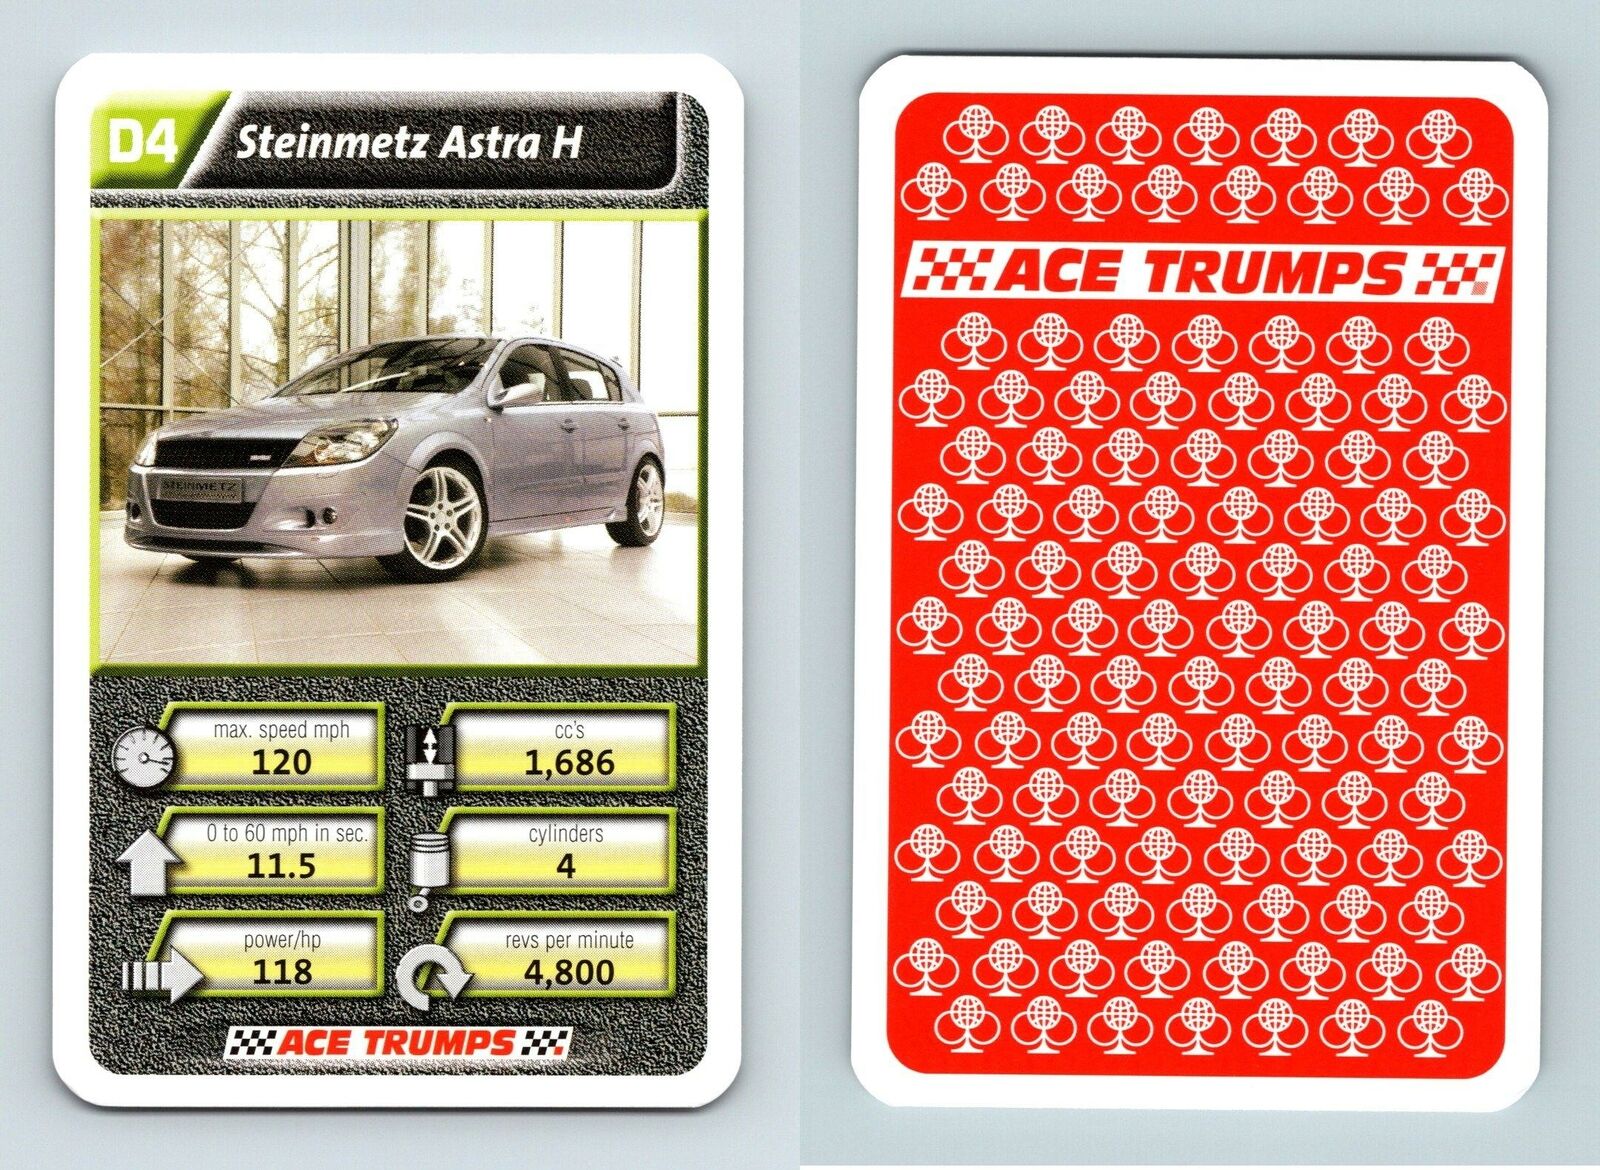 Steinmetz Astra H - Tuners - 2005 Ace Trumps Card